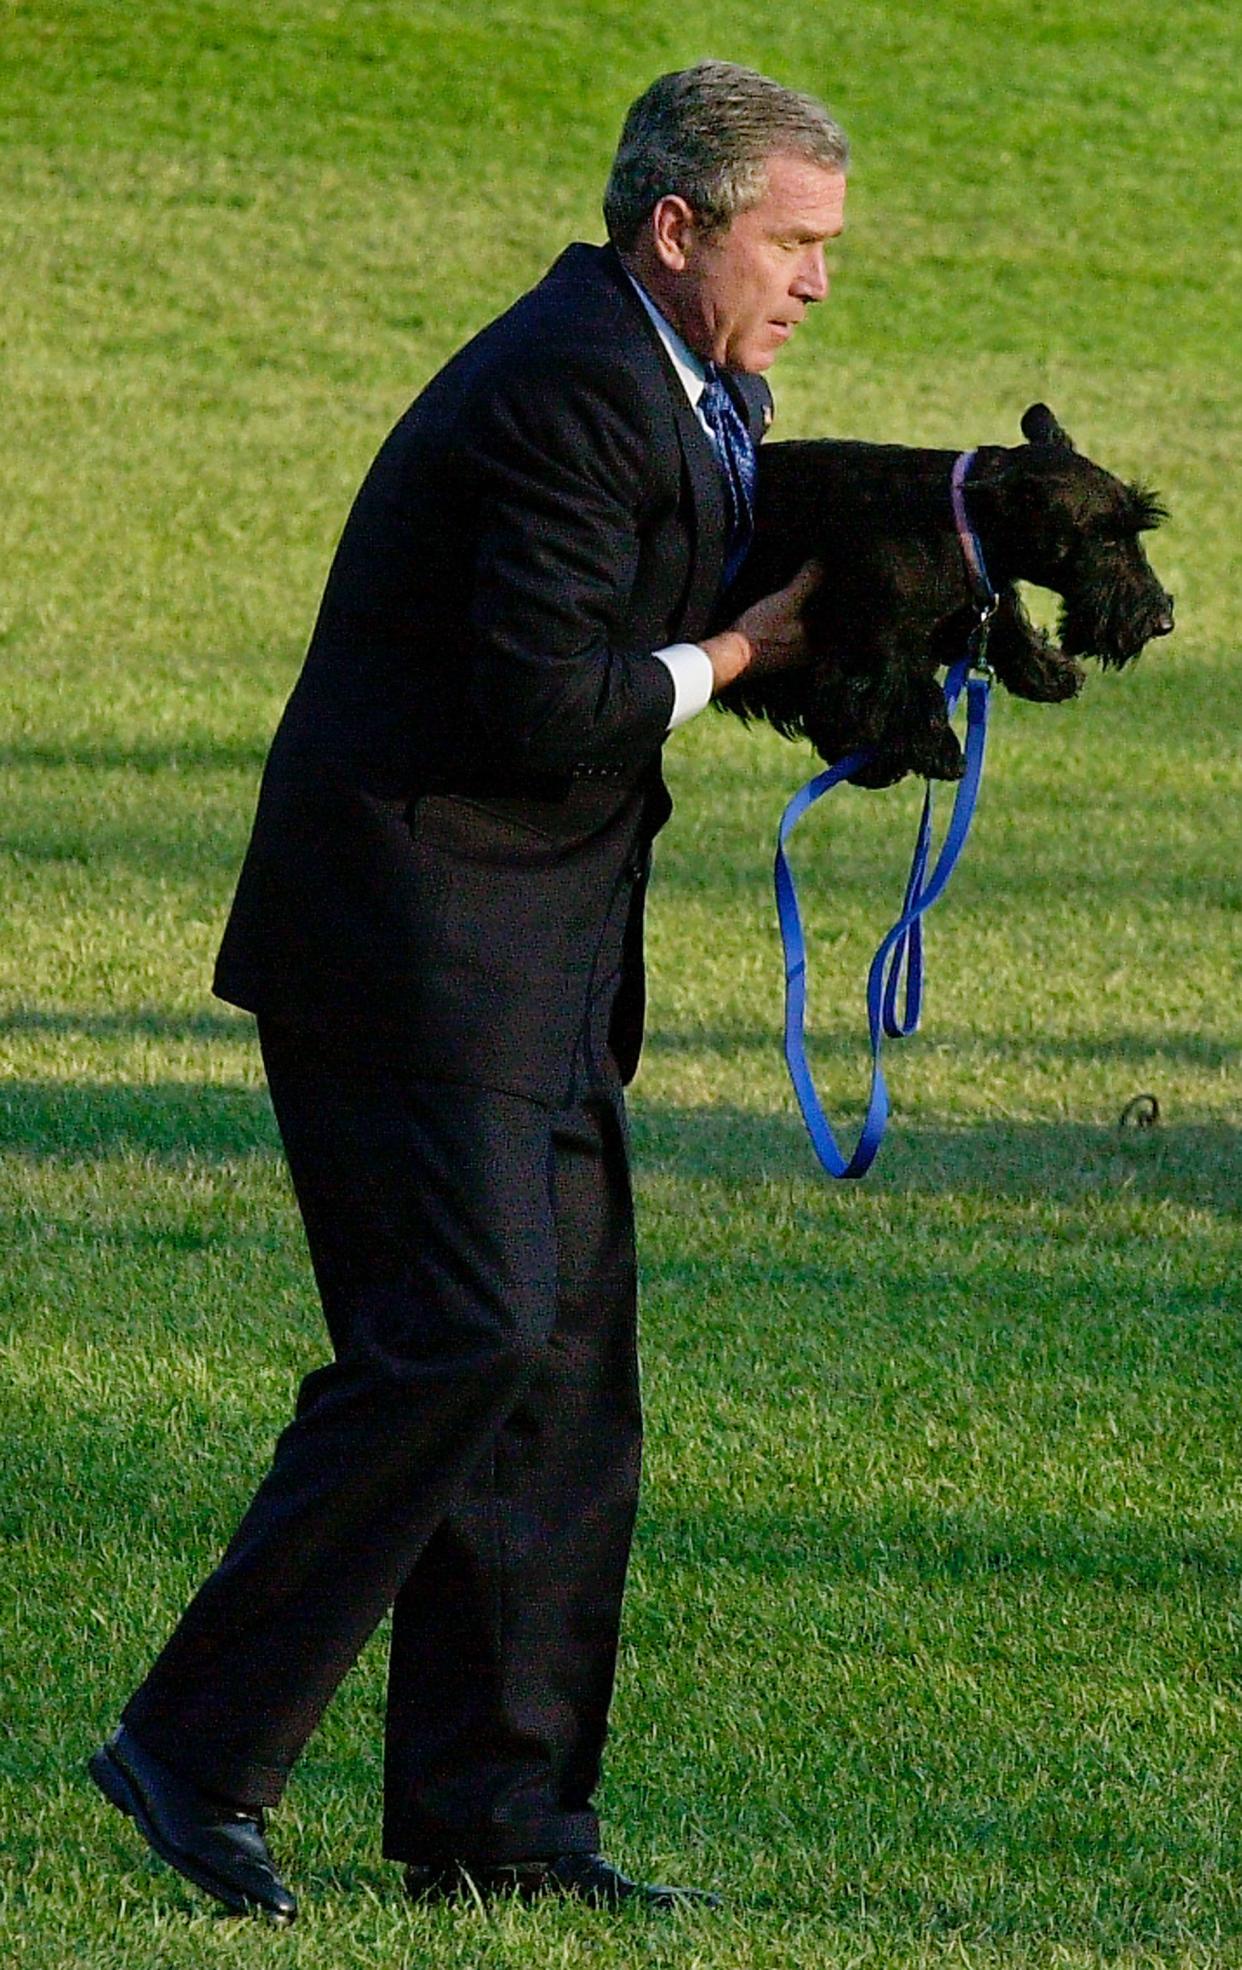 George W. Bush picks up his dog Barney as he walks on the South Lawn of the White House on April 4, 2002, in Washington, DC. (Mike Theiler/Getty Images)